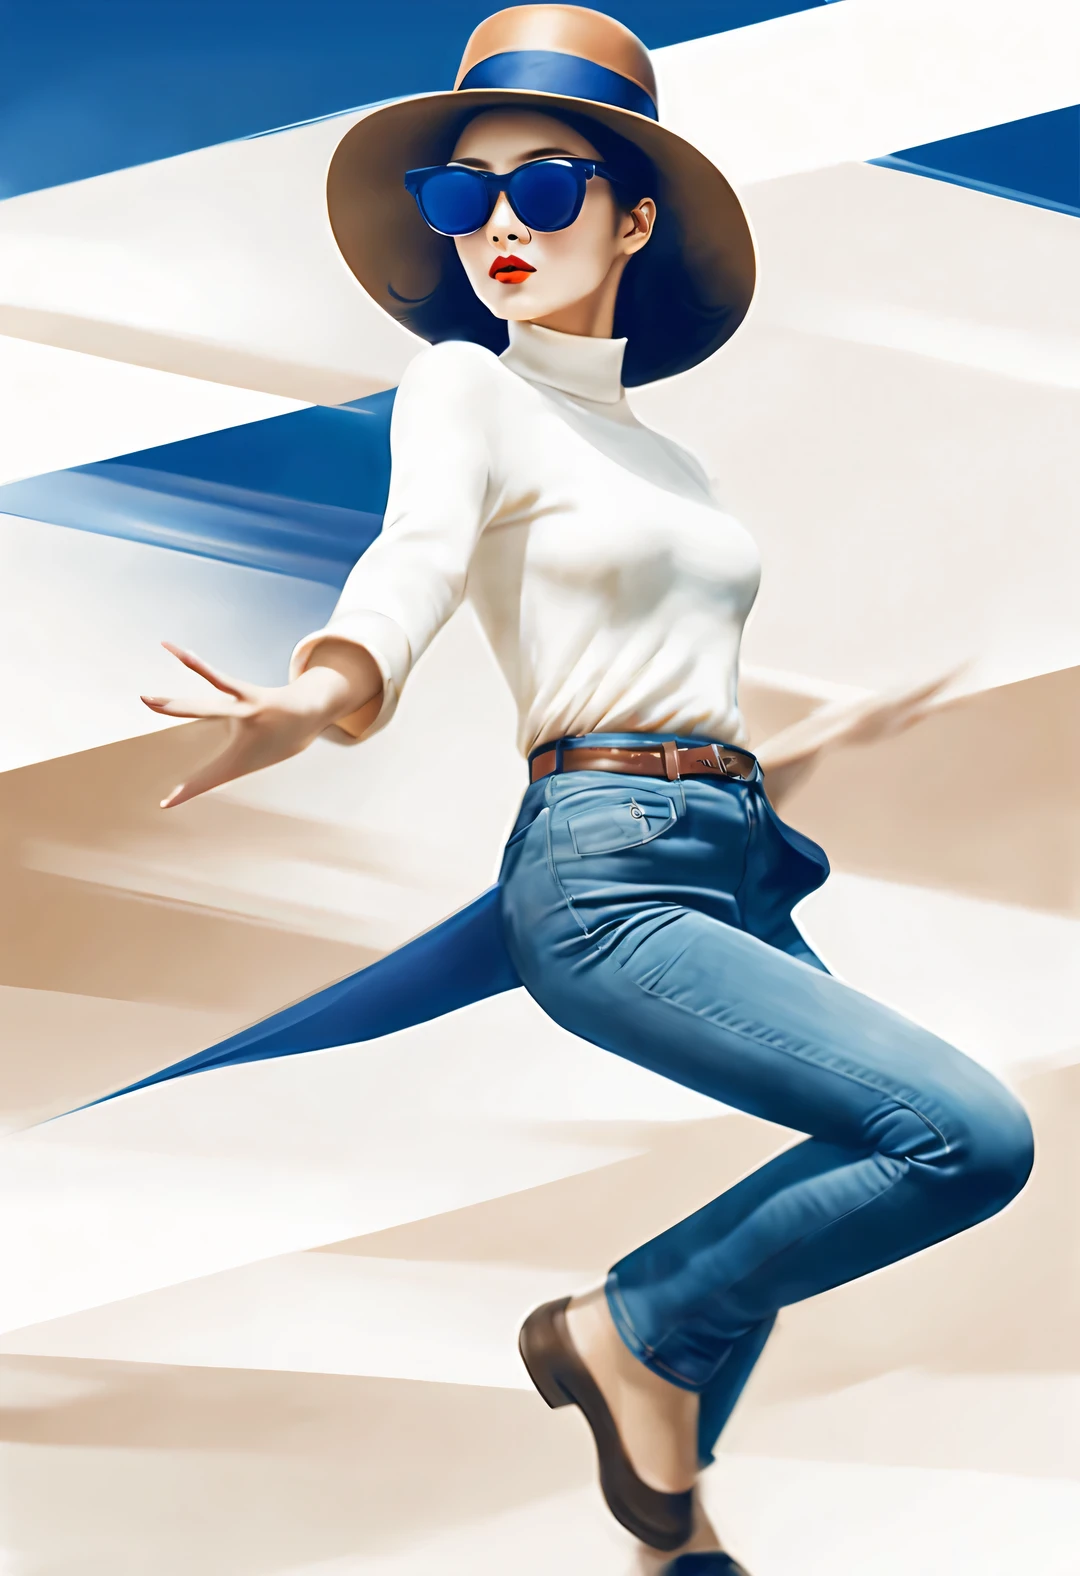 (Modern art dance simple poster design), (Half-length close-up), (Beautiful Chinese girl dancing in the air), (Wear modern fashionable winter fashion: 0.8), (Wearing big sunglasses and top hat: 1.2), Harmonious combination of classic and modern, An elegant combination of dark blue and brown，Highlight the retro charm without losing fashion sense. sweater and jeans, and high-end silk scarves and jackets, Exudes elegance, Girl fair and flawless smooth skin, high nose bridge, Head up posture, sad yet beautiful, slender figure, Exquisite facial features,
swirling fog illustration, ink painting, black hair, a ball head, Proud, Surrealism, contemporary art photography, action painting illustration, abstract expressionism, Pixar, depth of field, motion blur, backlight, Fall out, decline, Elevation viewing angle, Sony FE General Manager, ultra high definition, masterpiece, Accuracy, textured skin, Super details, high detail, high quality, Award-winning, best quality, Level, 16k, Shot from a bottom-up perspective,